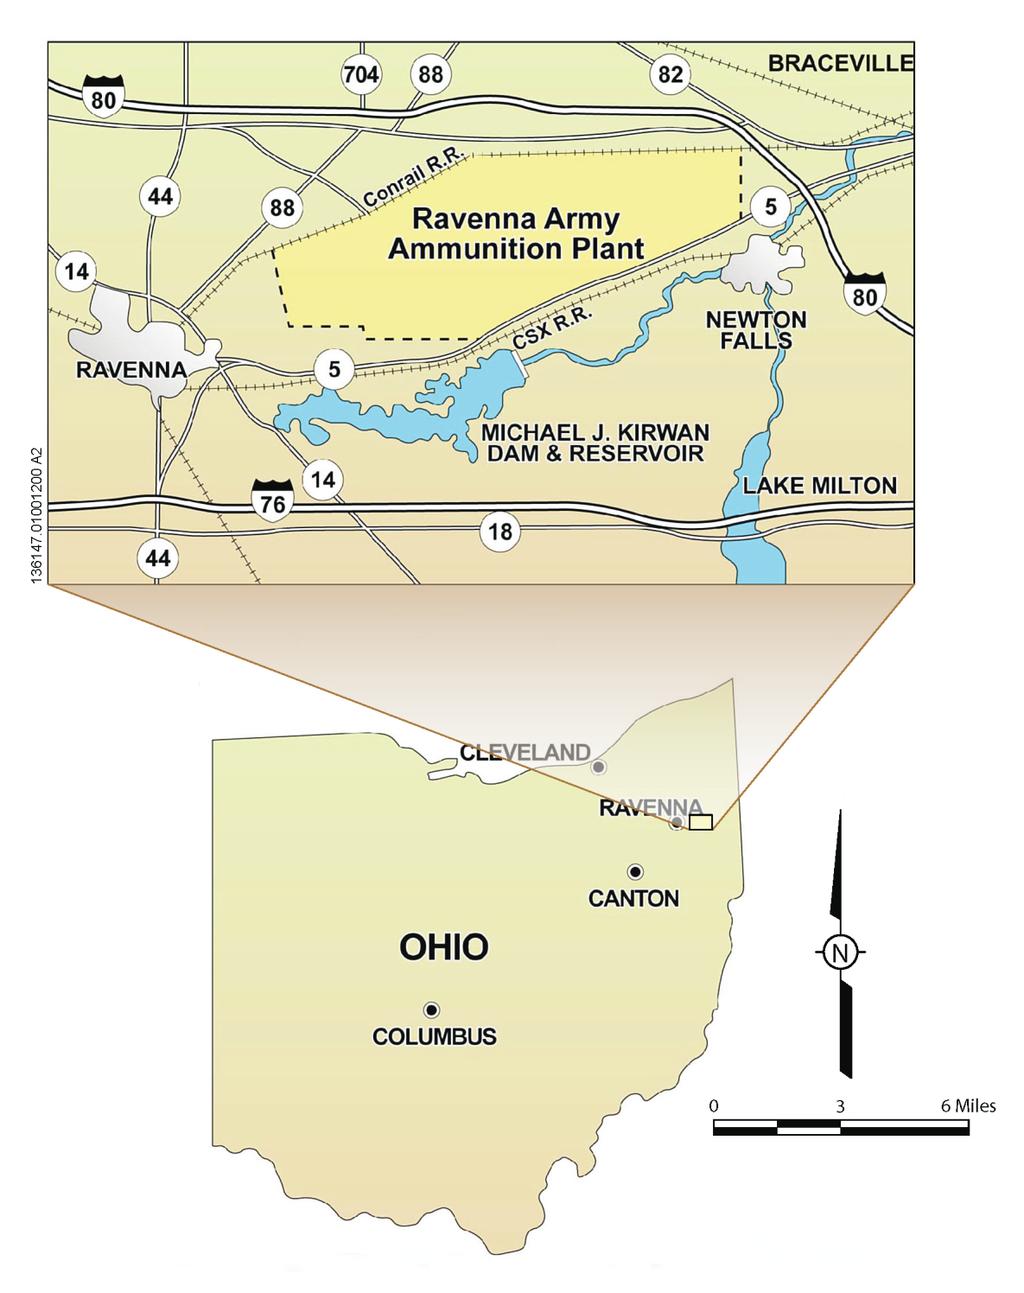 HGL No Further Action Proposed Plan Former RVAAP, Ohio Camp Ravenna/ Former RVAAP 0 3 6 12 Miles \\Gst-srv-01\HGLGIS\Ravenna_AAP\LNW\PP\ (01)Location_Map.